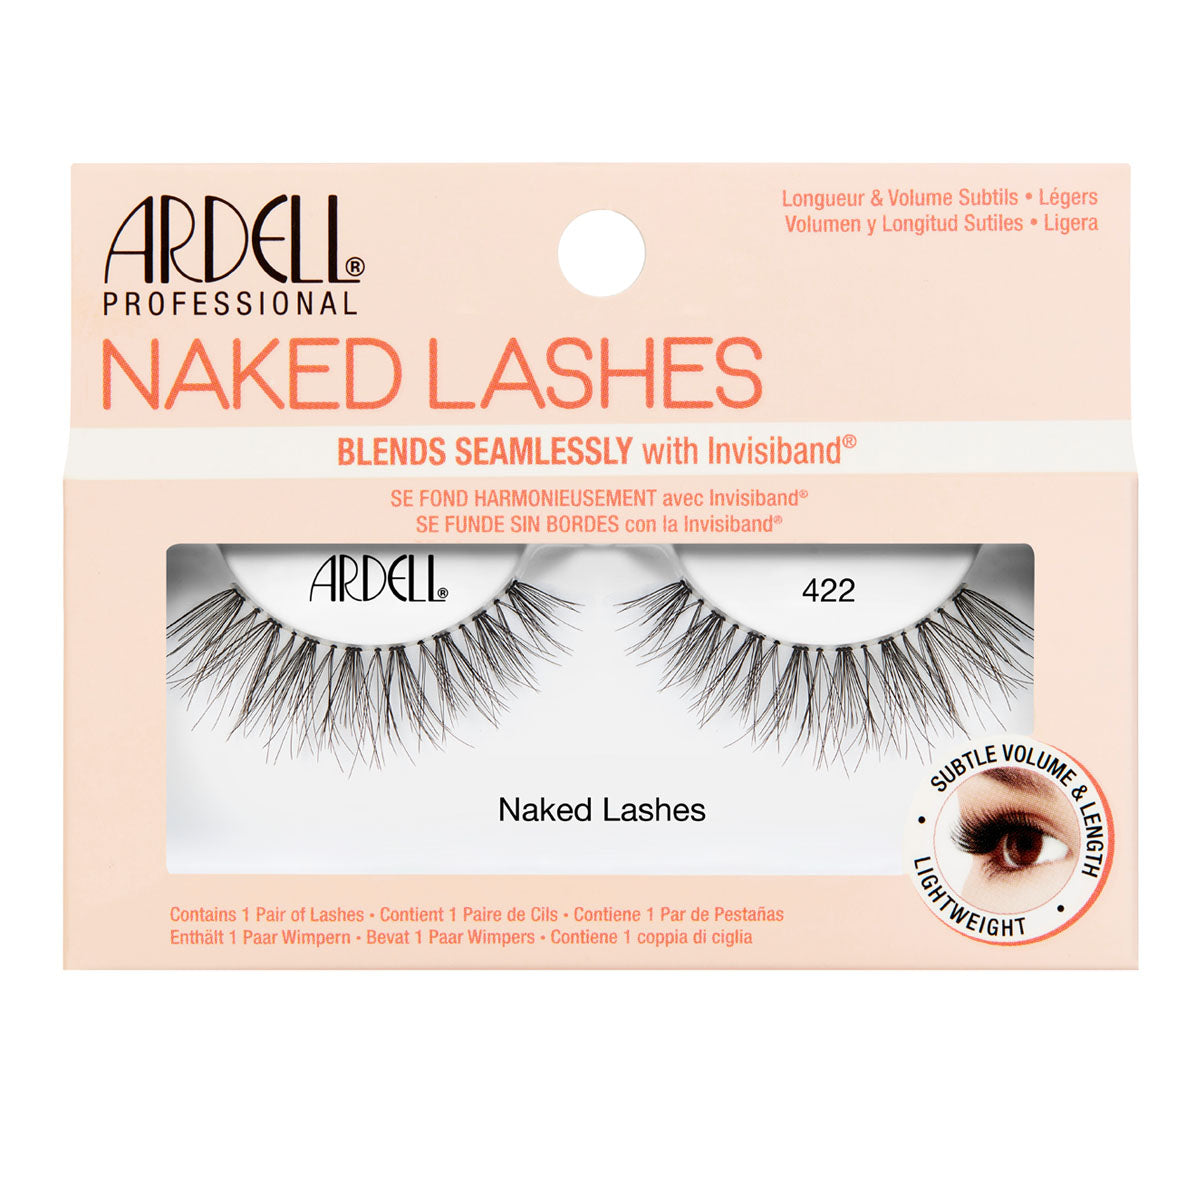 NAKED LASHES 422 - ARDELL 